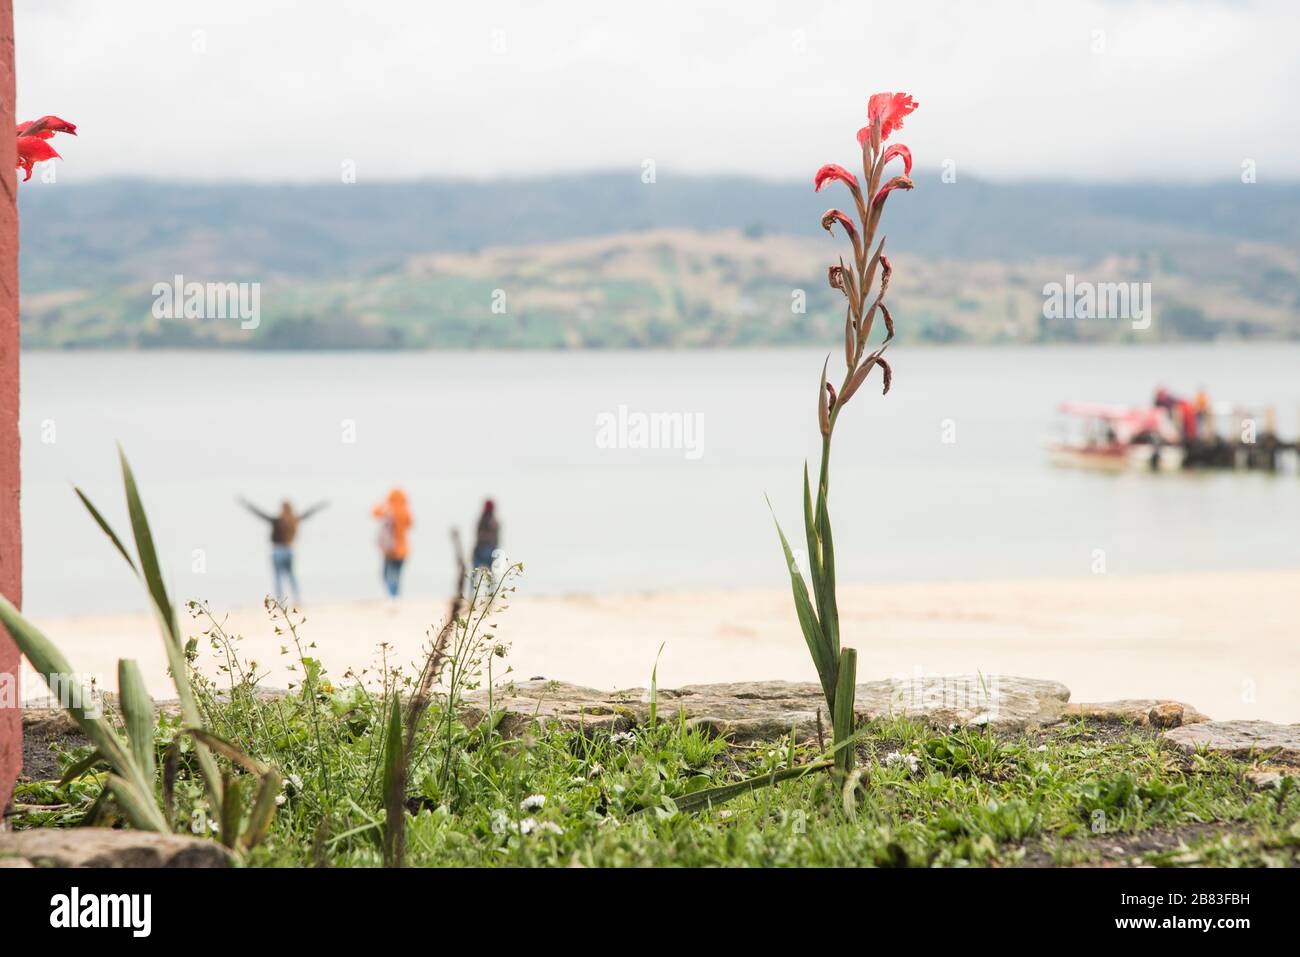 Lake Tota, Boyaca / Colombia: April 7, 2018: view of the largest lake in Colombia, flowers and happy tourists admiring the landscape Stock Photo